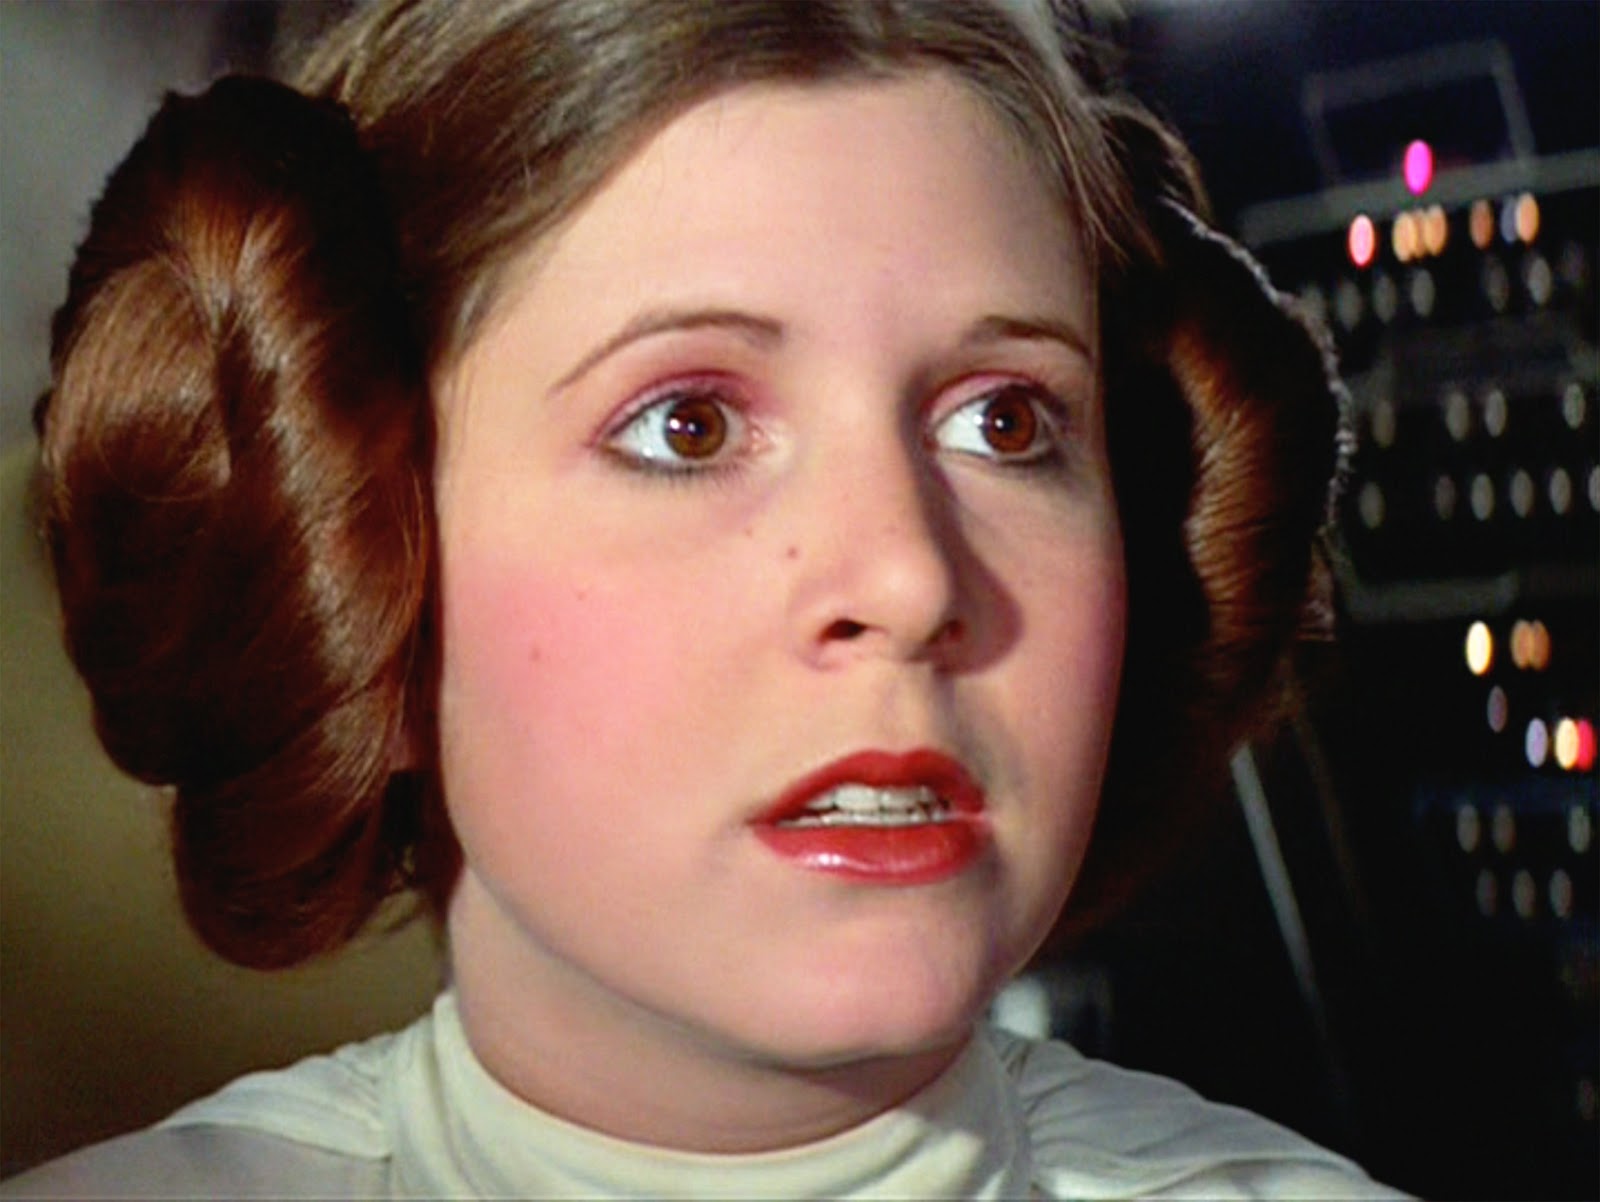 Carrie Frances Fisher